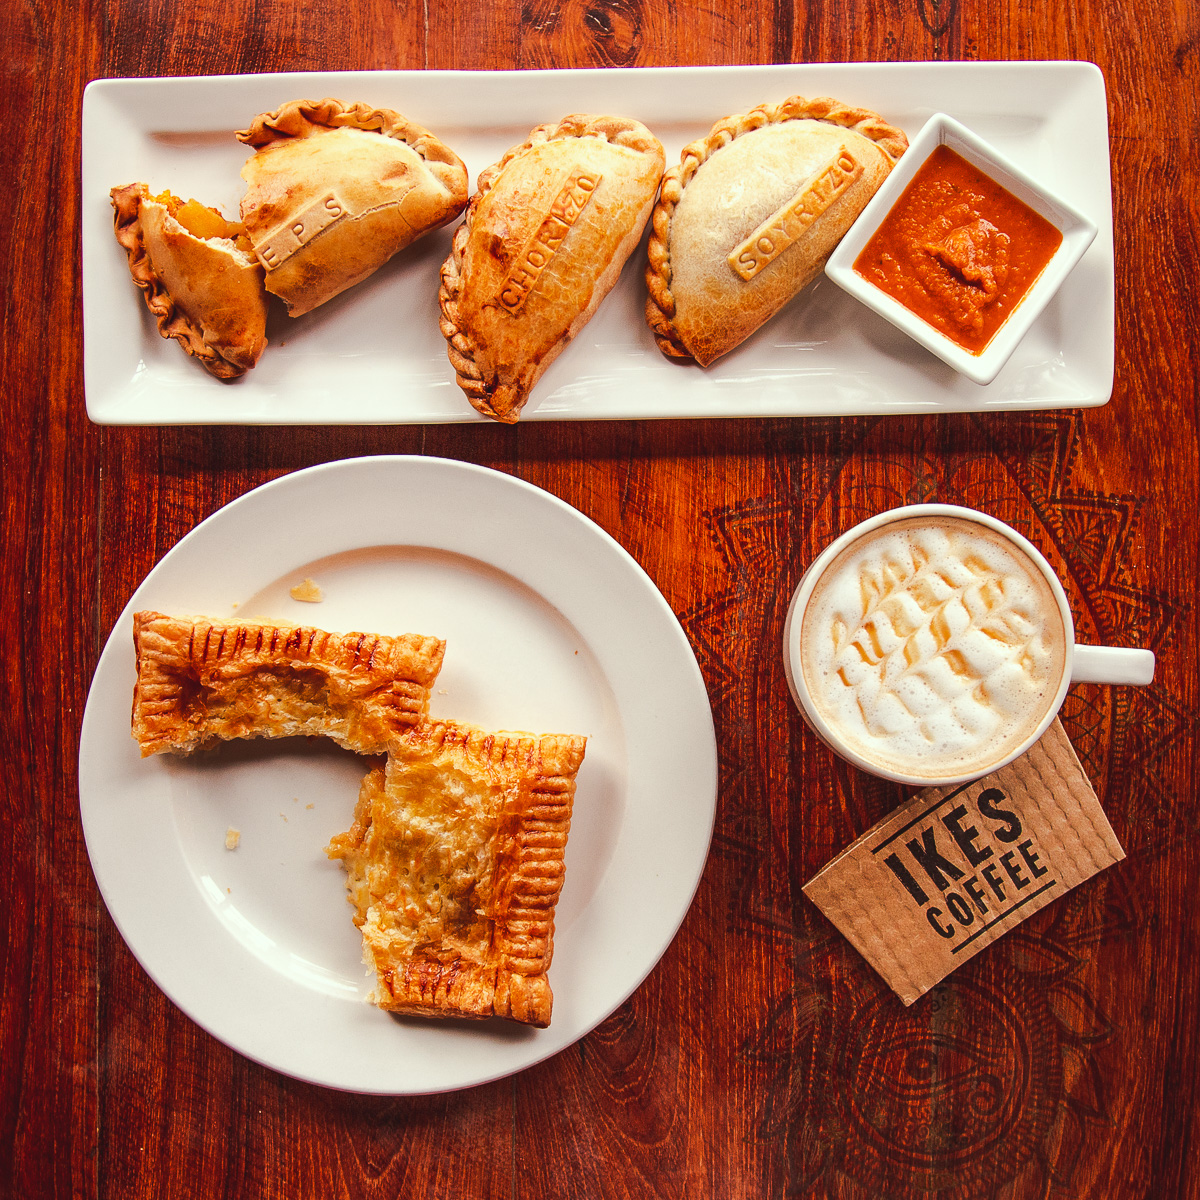 Empanadas, a pasty, and a latte from Ike's Coffee at Bombolé Eatery (Credit: Jackie Tran)